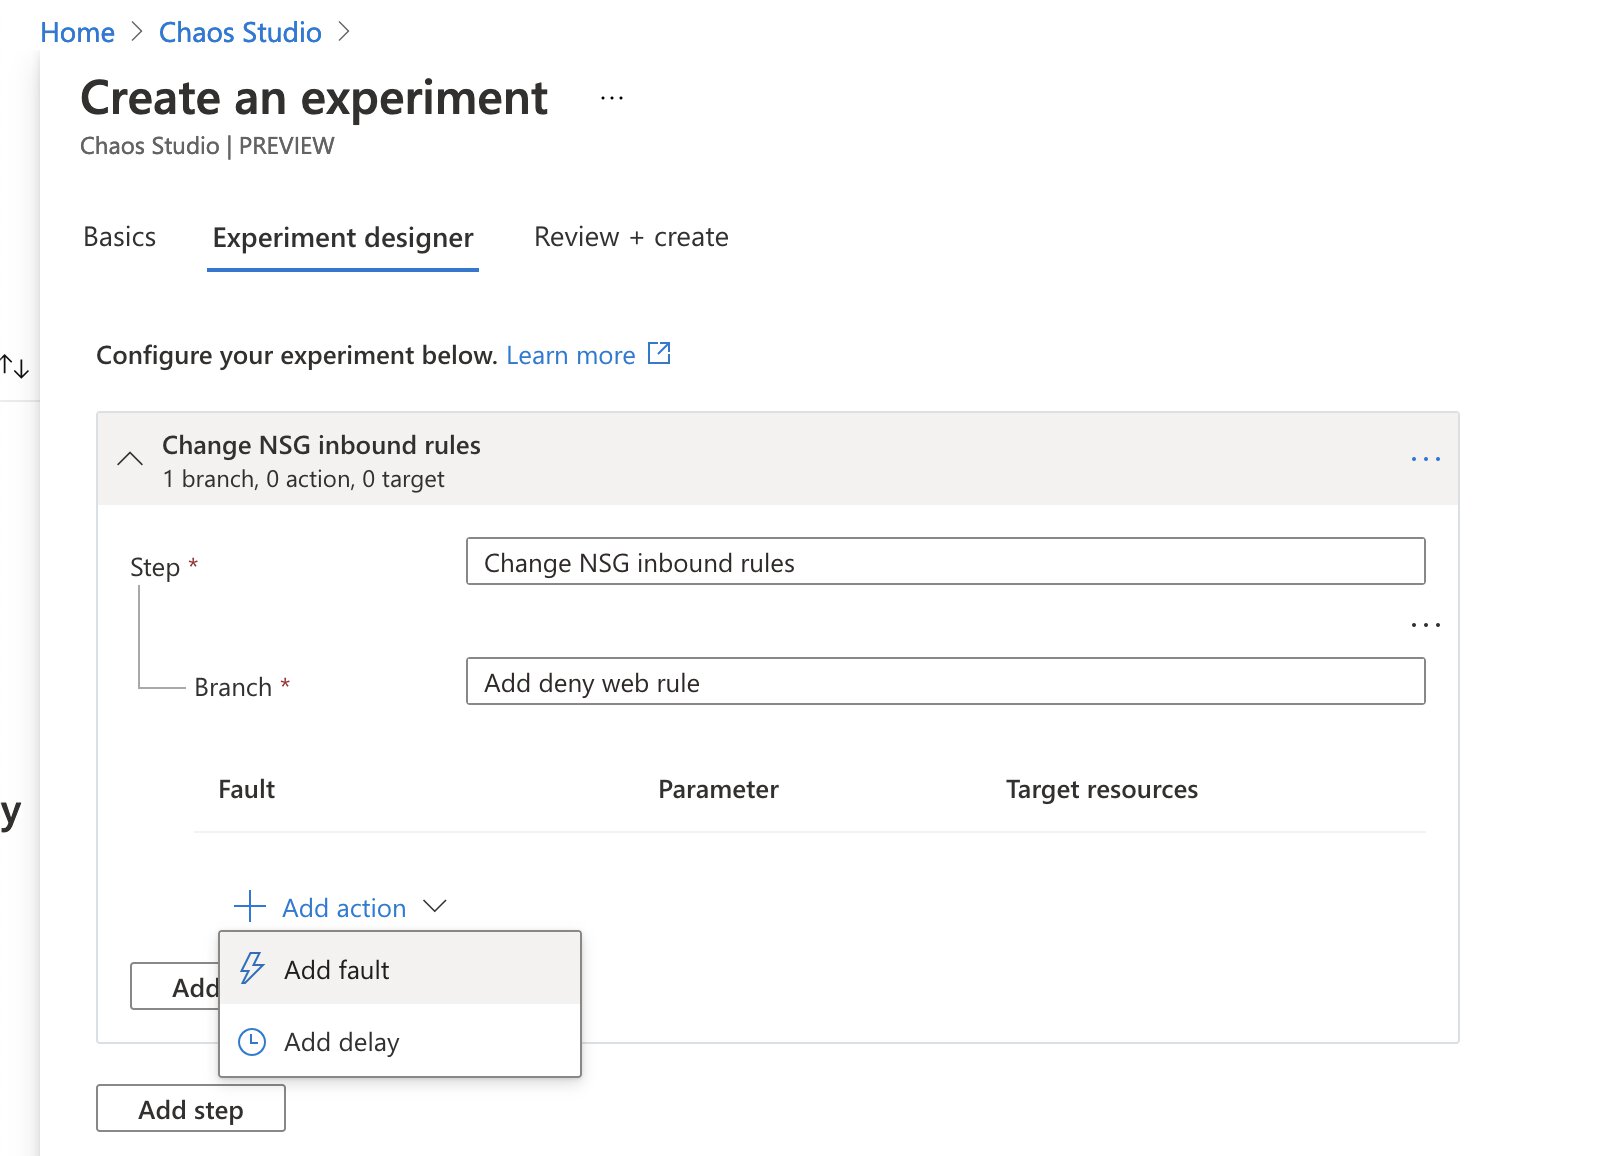 Image of the the Chaos Studio user interface showing the create experiment screen’s experiment designer tab. It has a single step called “change NSG inbound rules”, with a single branch “Add deny web rule”.